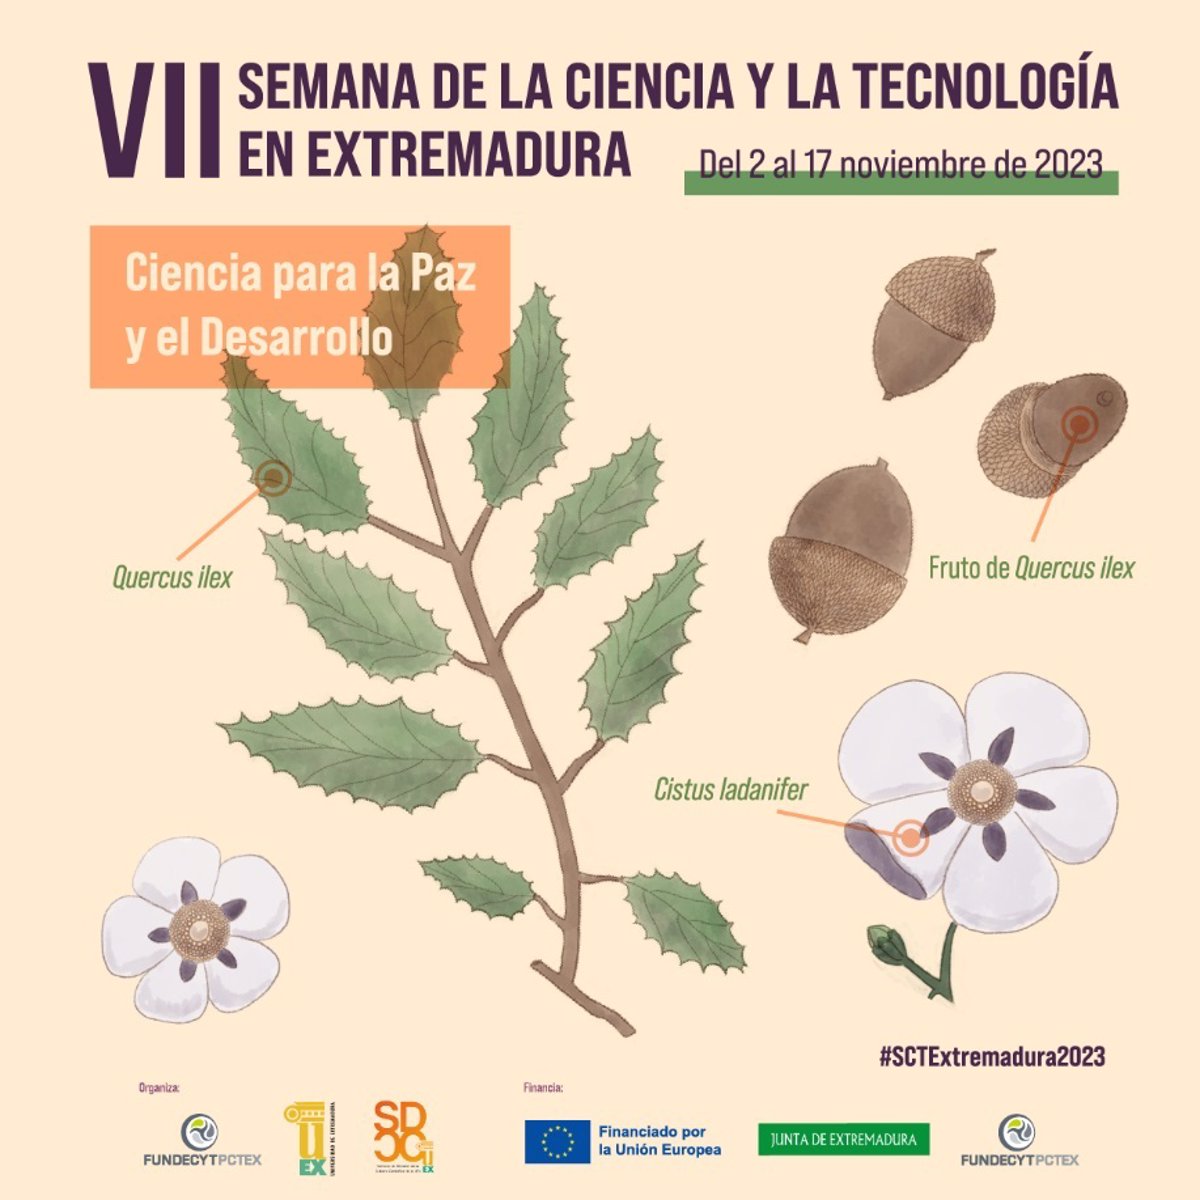 The VII Science and Technology Week in Extremadura will offer more than 100 outreach activities